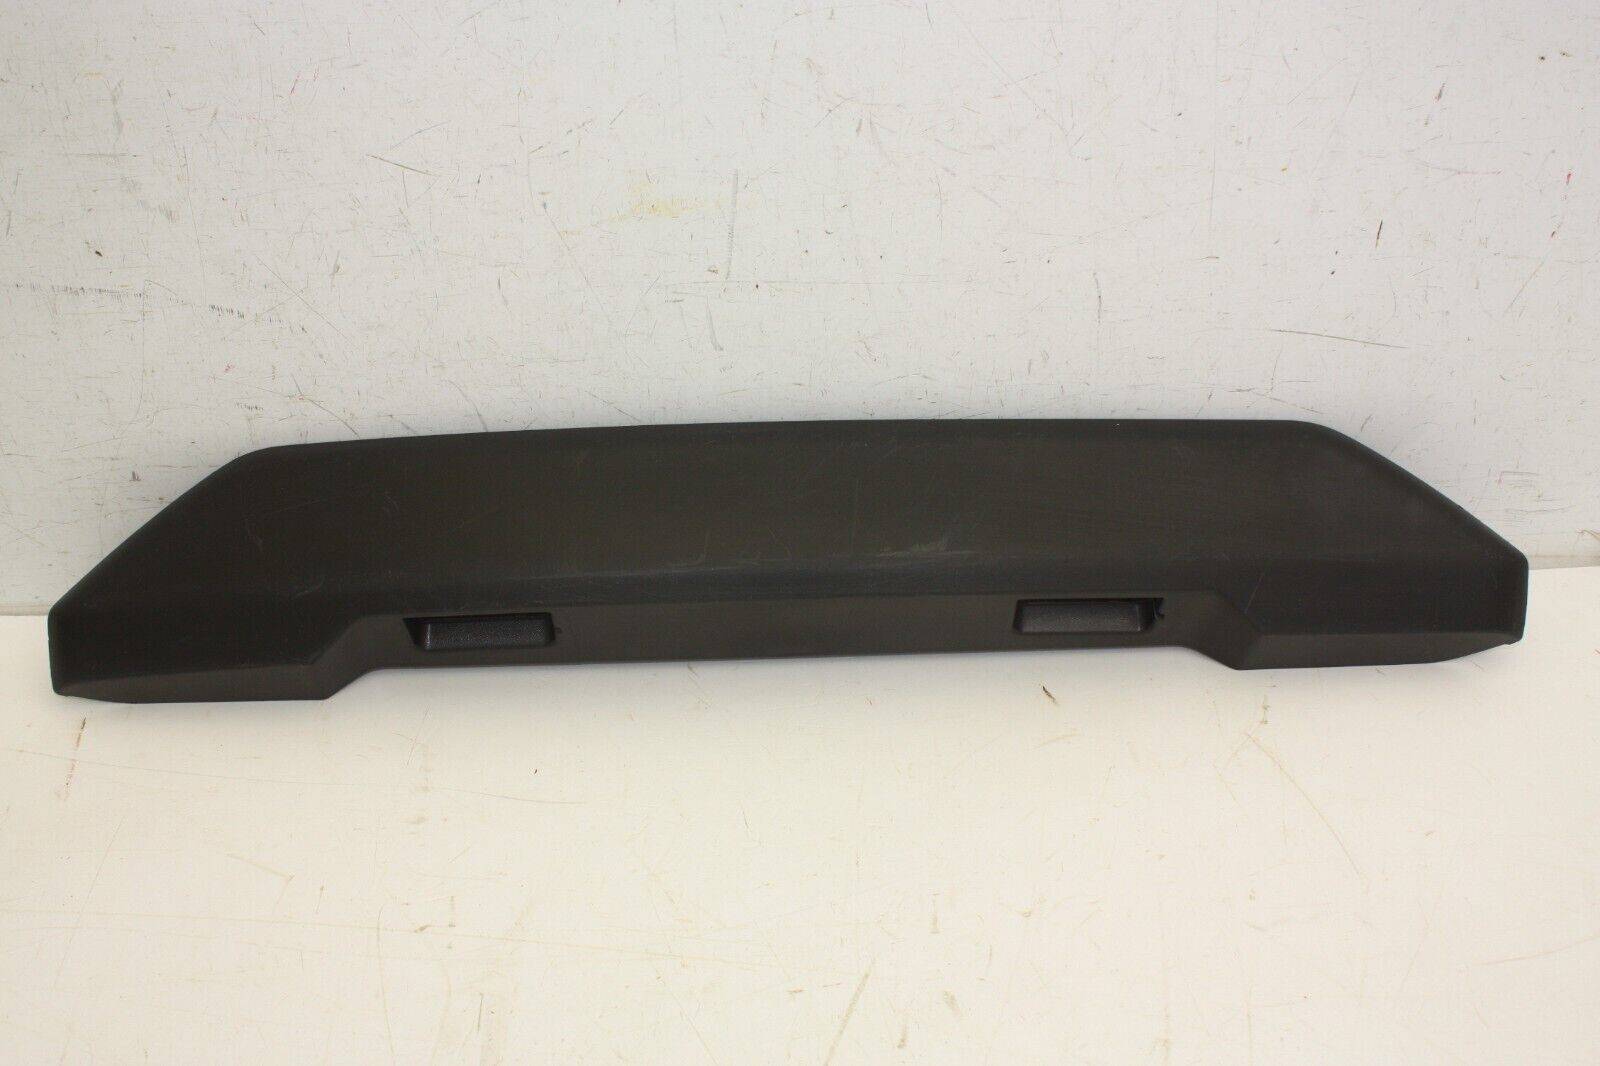 Ford-Transit-Custom-Tailgate-Lid-Cover-Recording-Bar-2018-ON-BK21-13555-AFW-176302846649